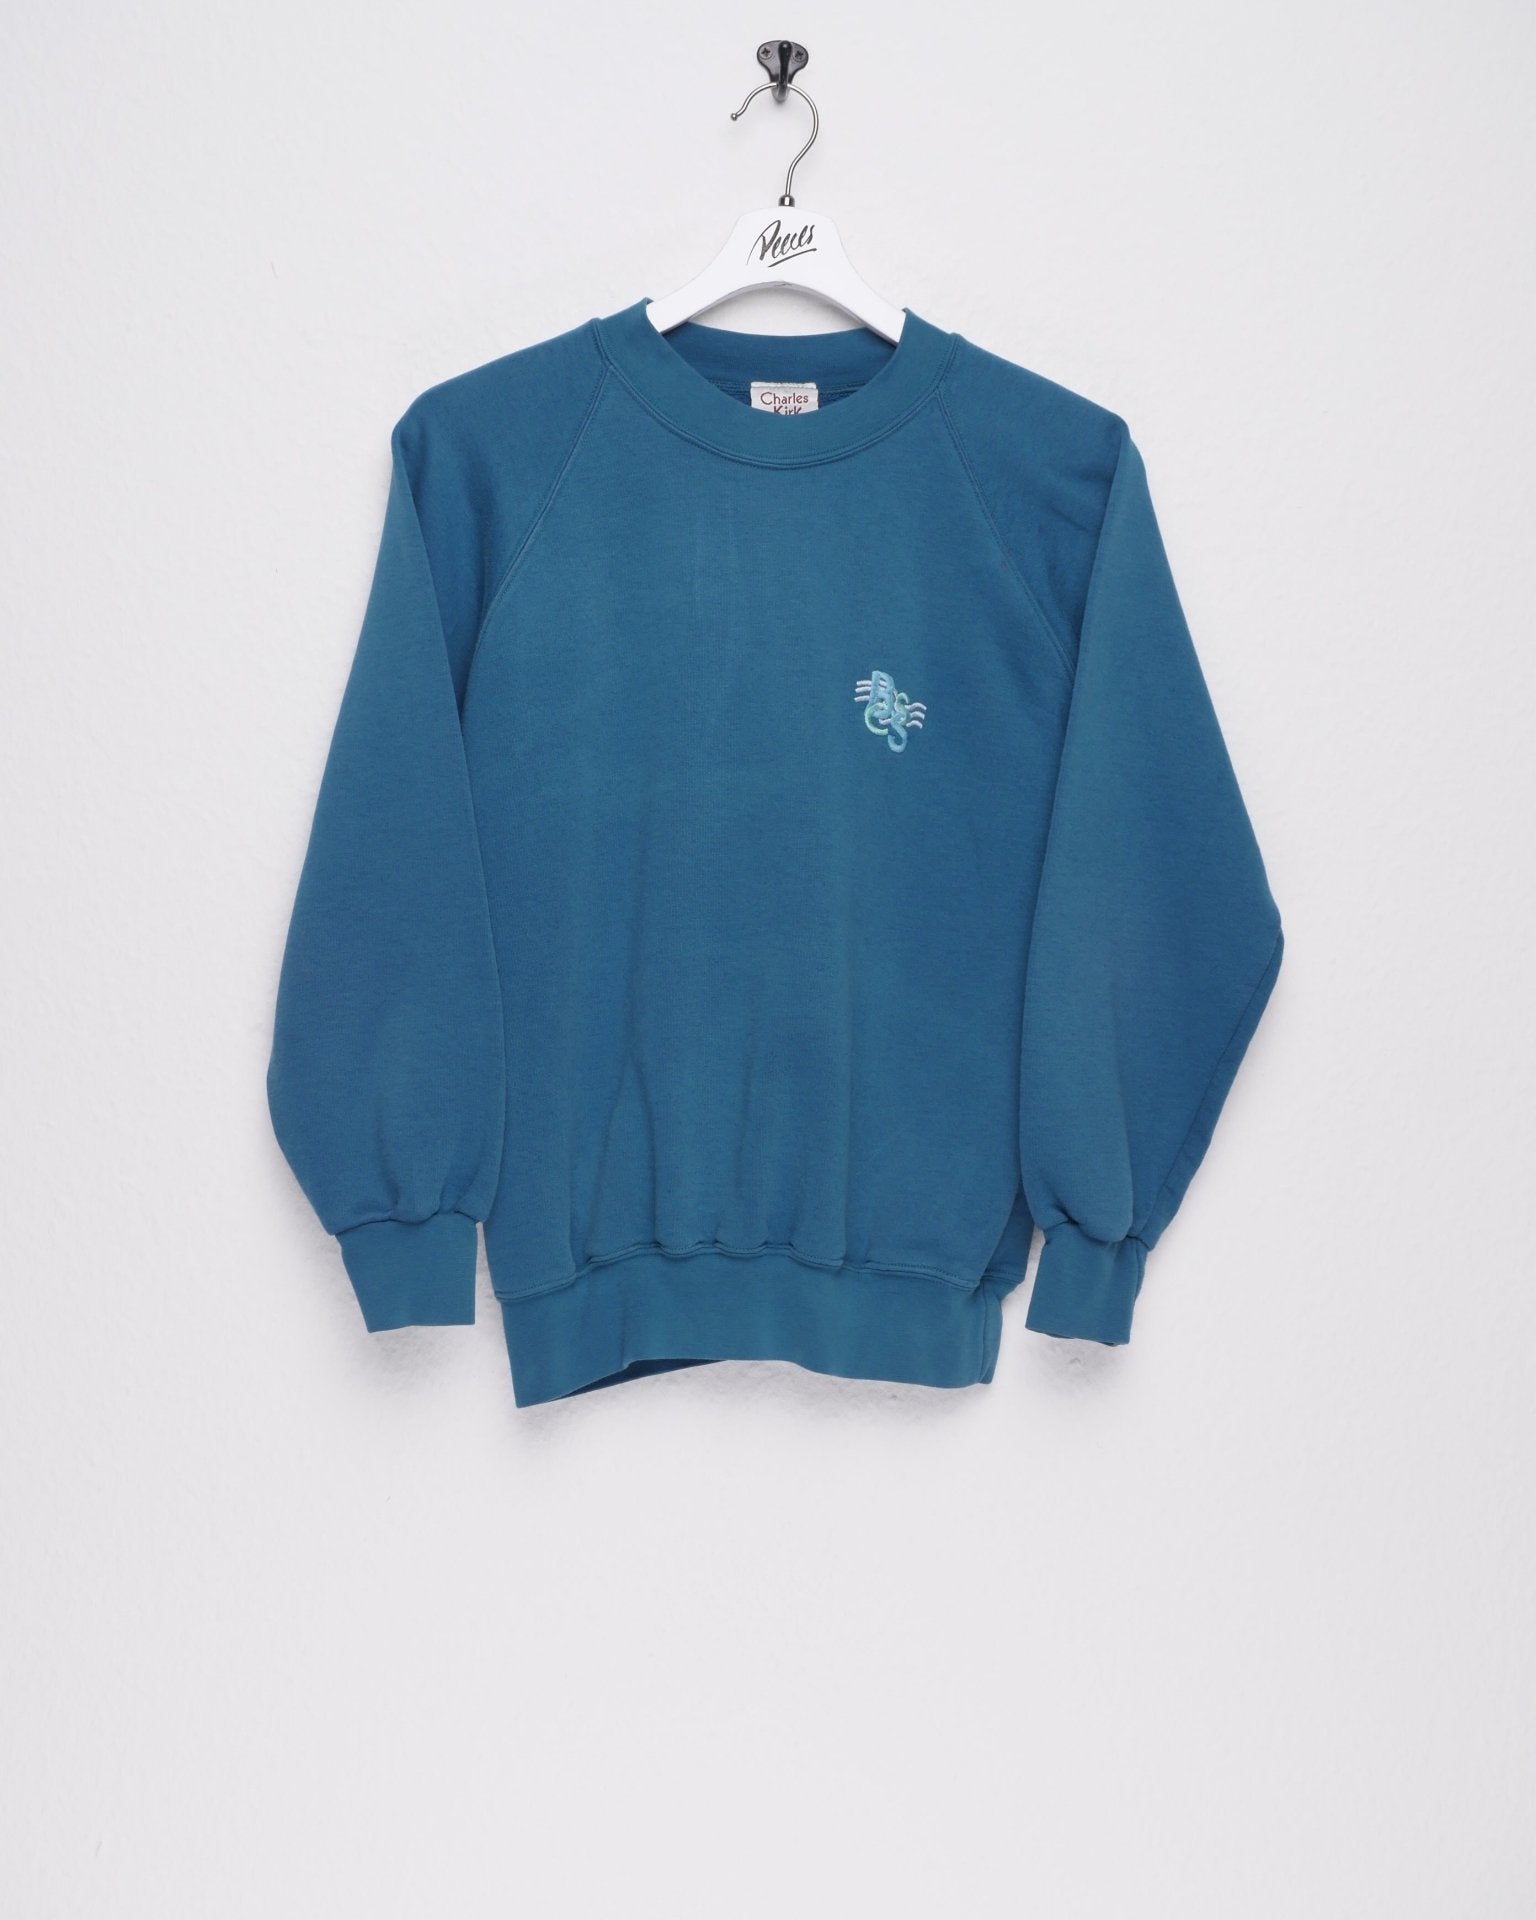 embroidered turquoise basic Sweater - Peeces